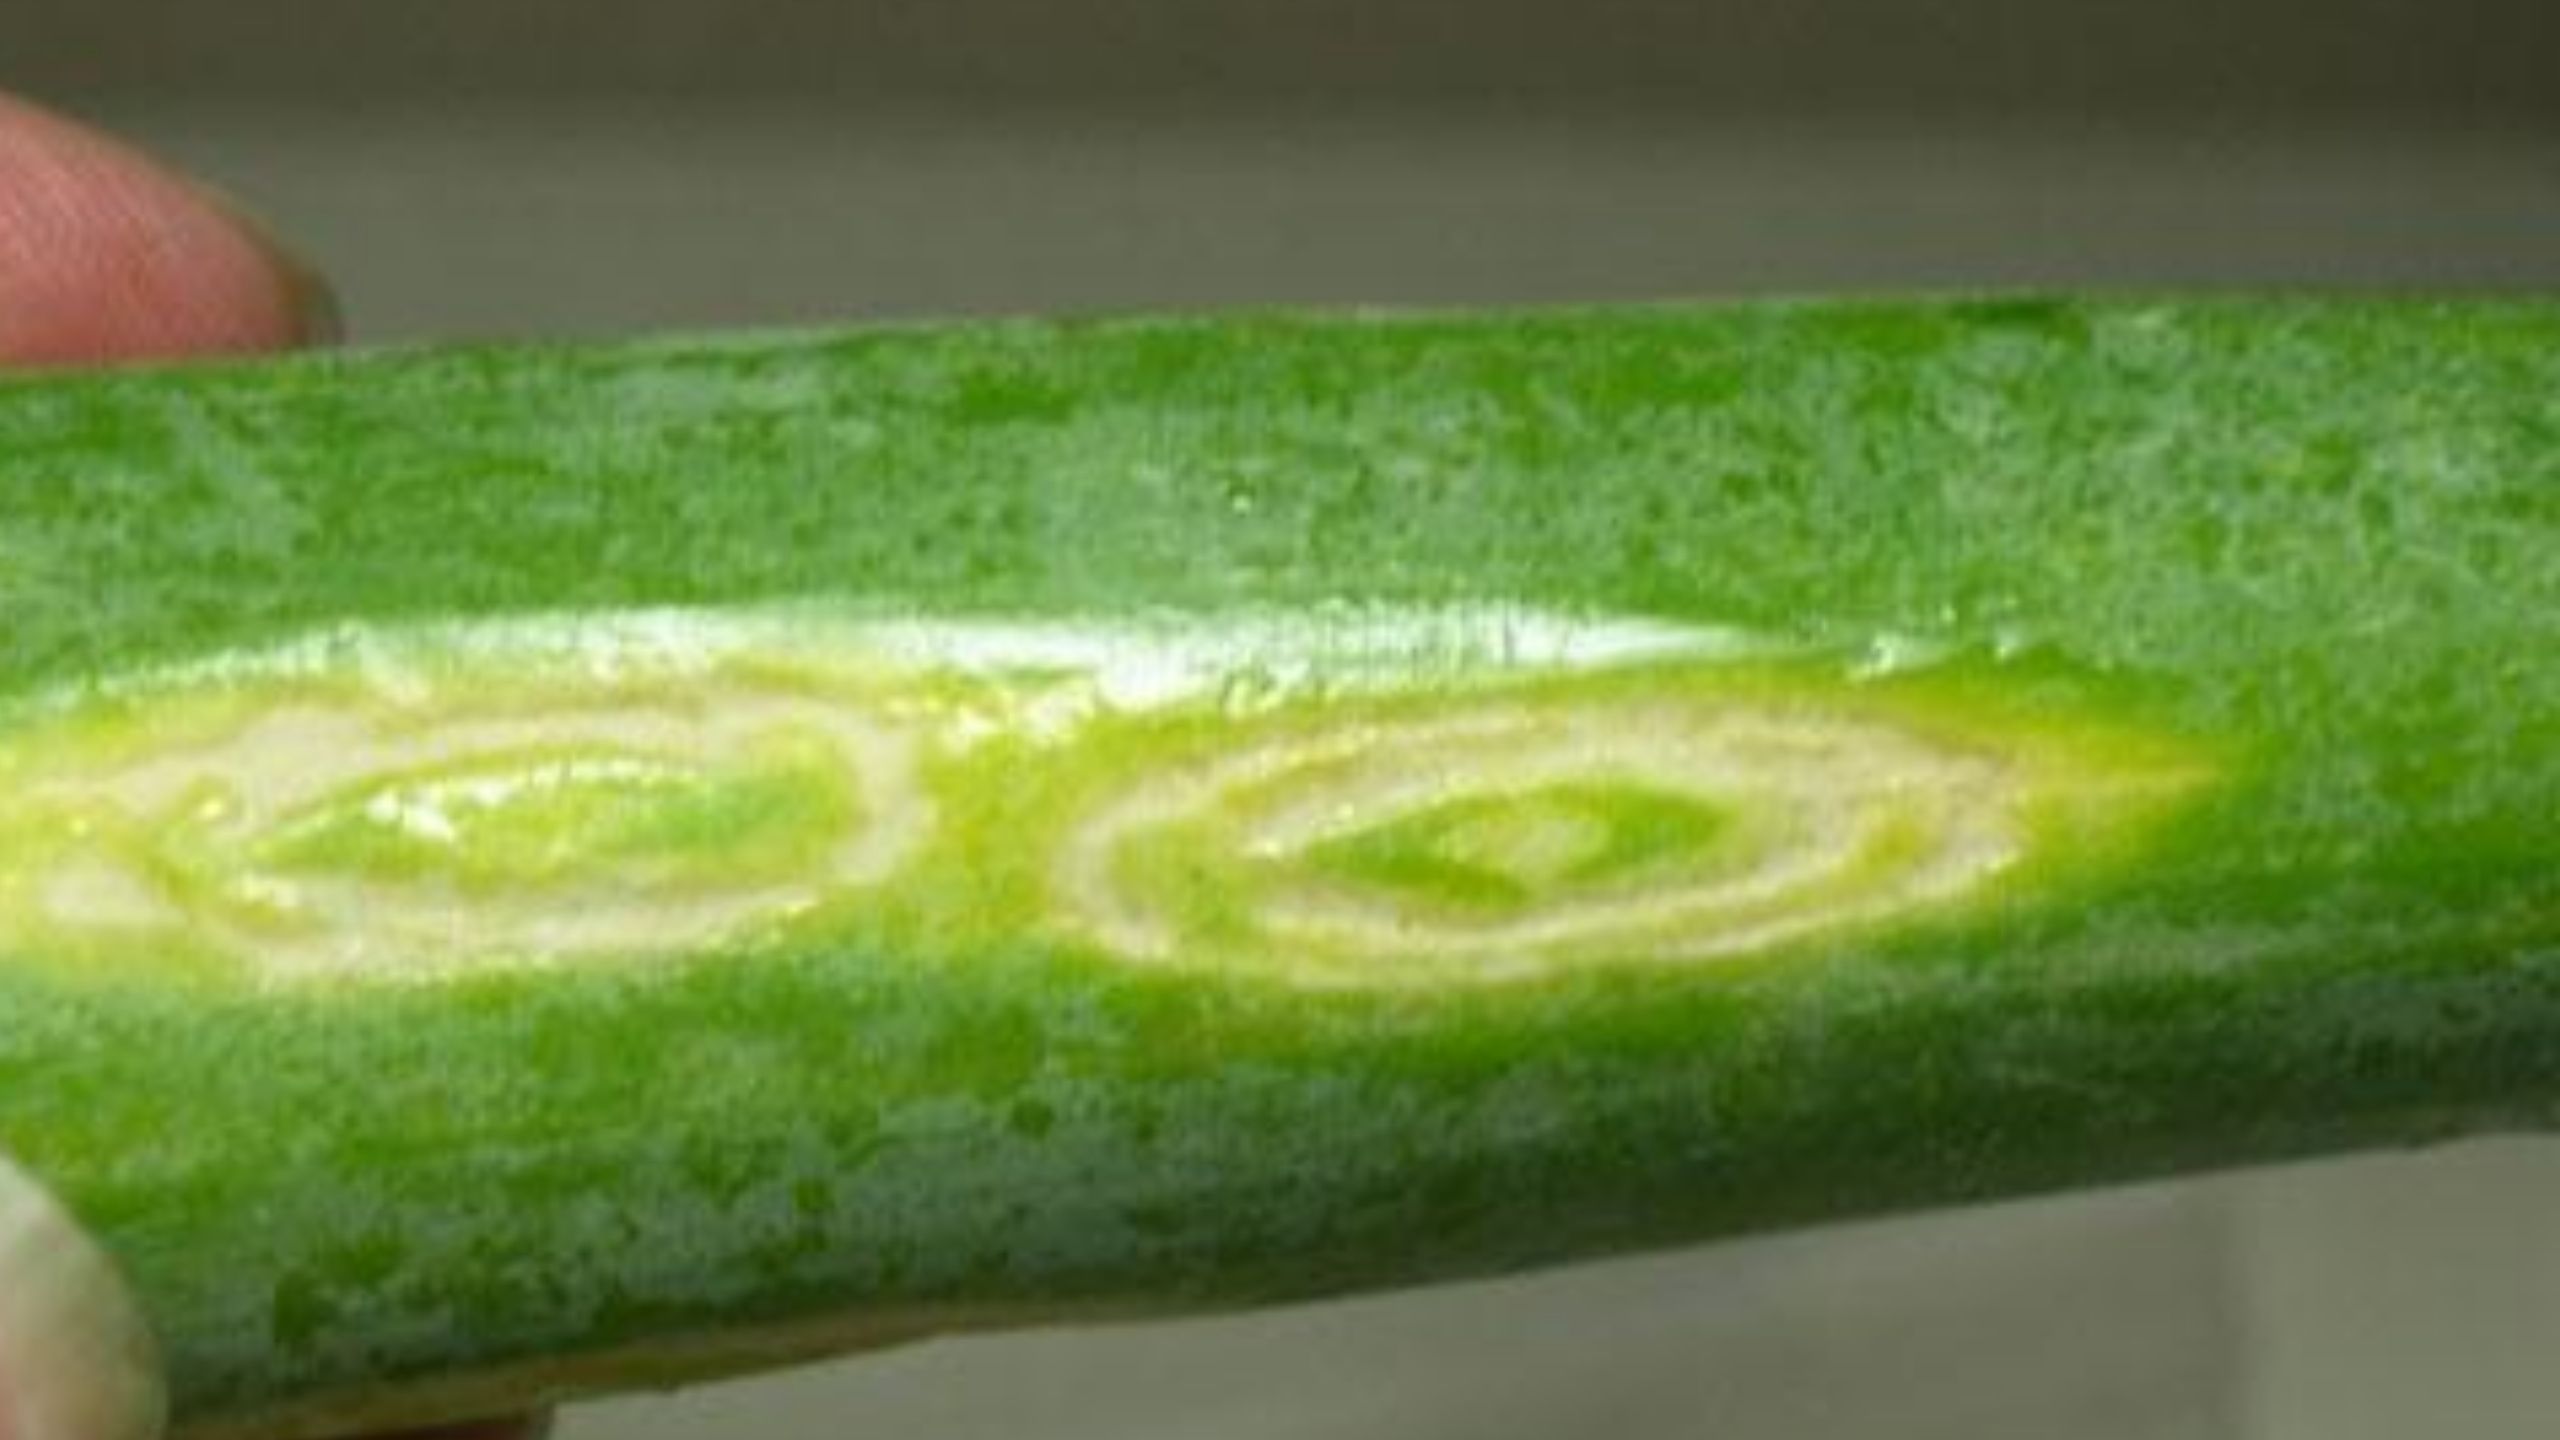  Fig. 1. IYSV lesions on onion leaves often appear more elongated than wide and are often described as diamond shaped. Lesions can coalesce making unusual, irregular shaped, larger lesions that girdle a leaf and begin to kill it (see arrow on center plant).